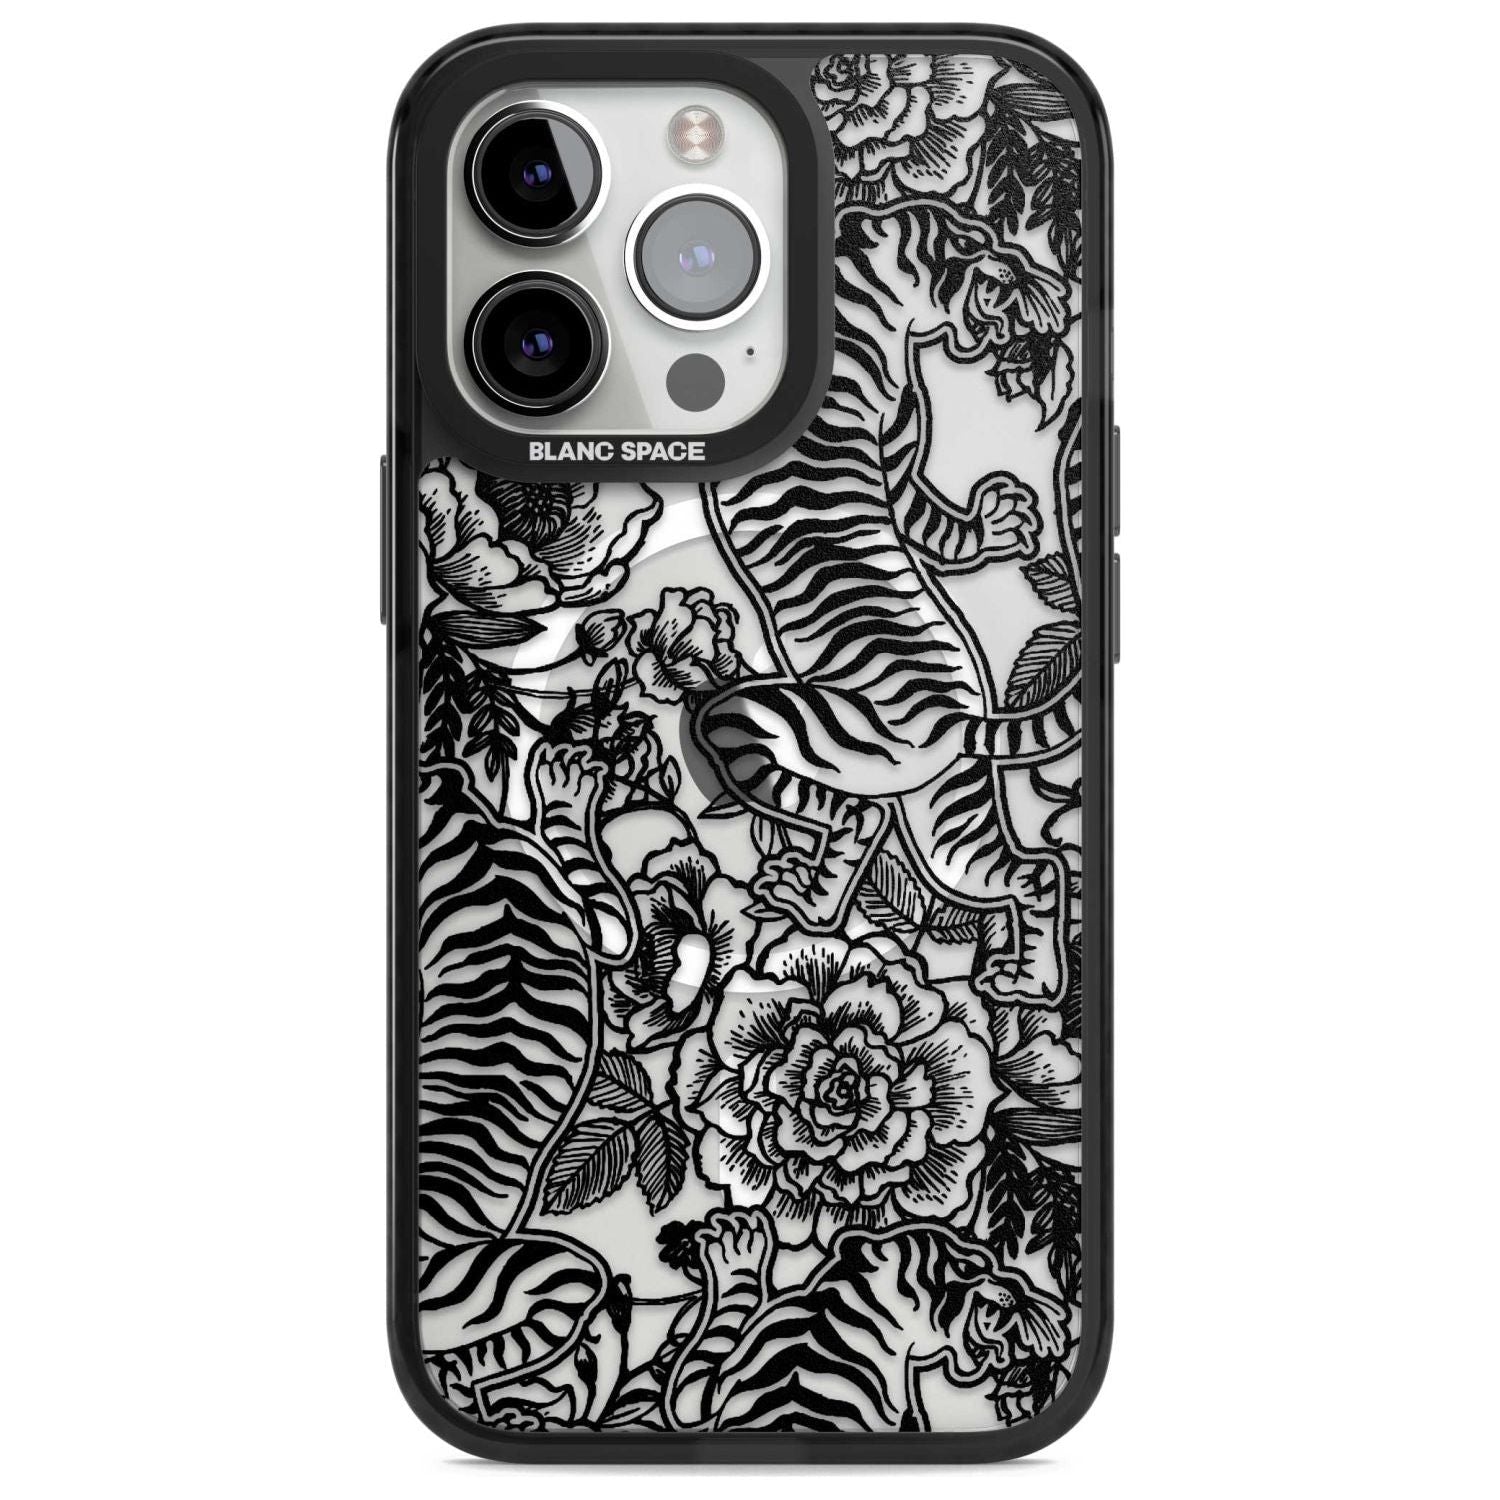 Personalised Chinese Tiger Pattern Custom Phone Case iPhone 15 Pro Max / Magsafe Black Impact Case,iPhone 15 Pro / Magsafe Black Impact Case,iPhone 14 Pro Max / Magsafe Black Impact Case,iPhone 14 Pro / Magsafe Black Impact Case,iPhone 13 Pro / Magsafe Black Impact Case Blanc Space